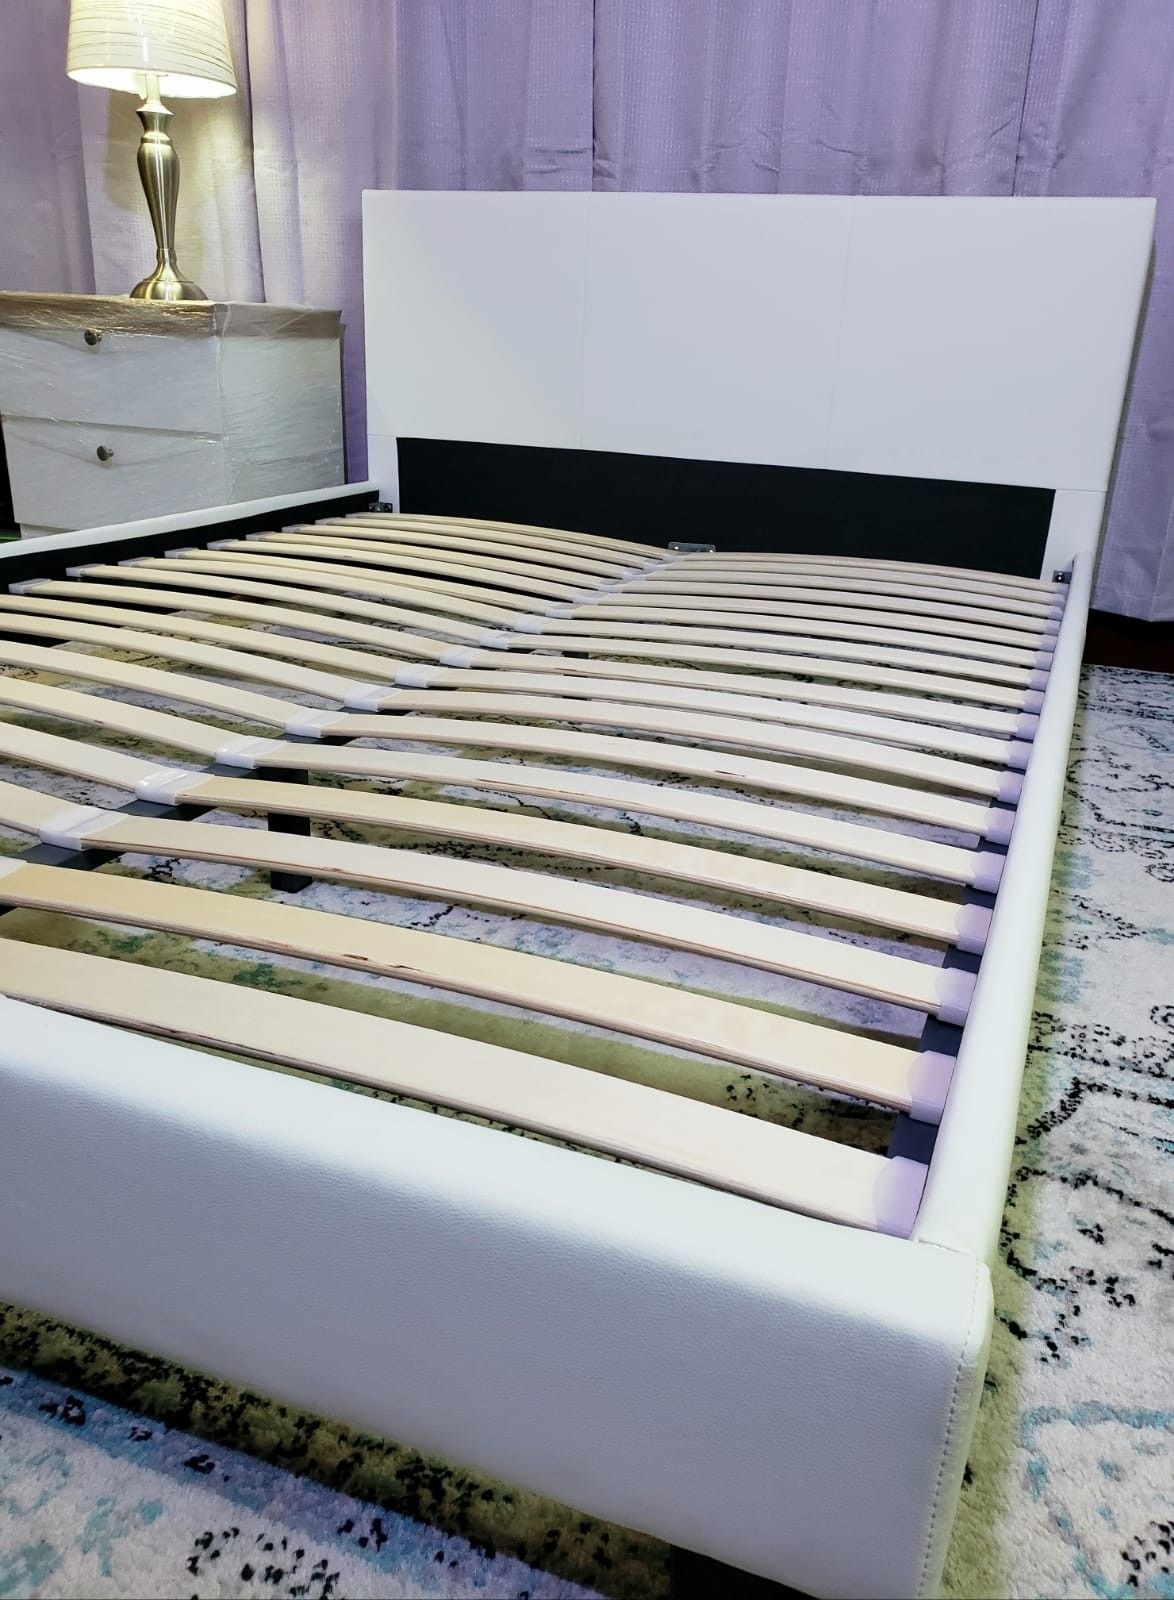 FULL upholstered platform bed frame come NEW IN BOX, mattress sold separately